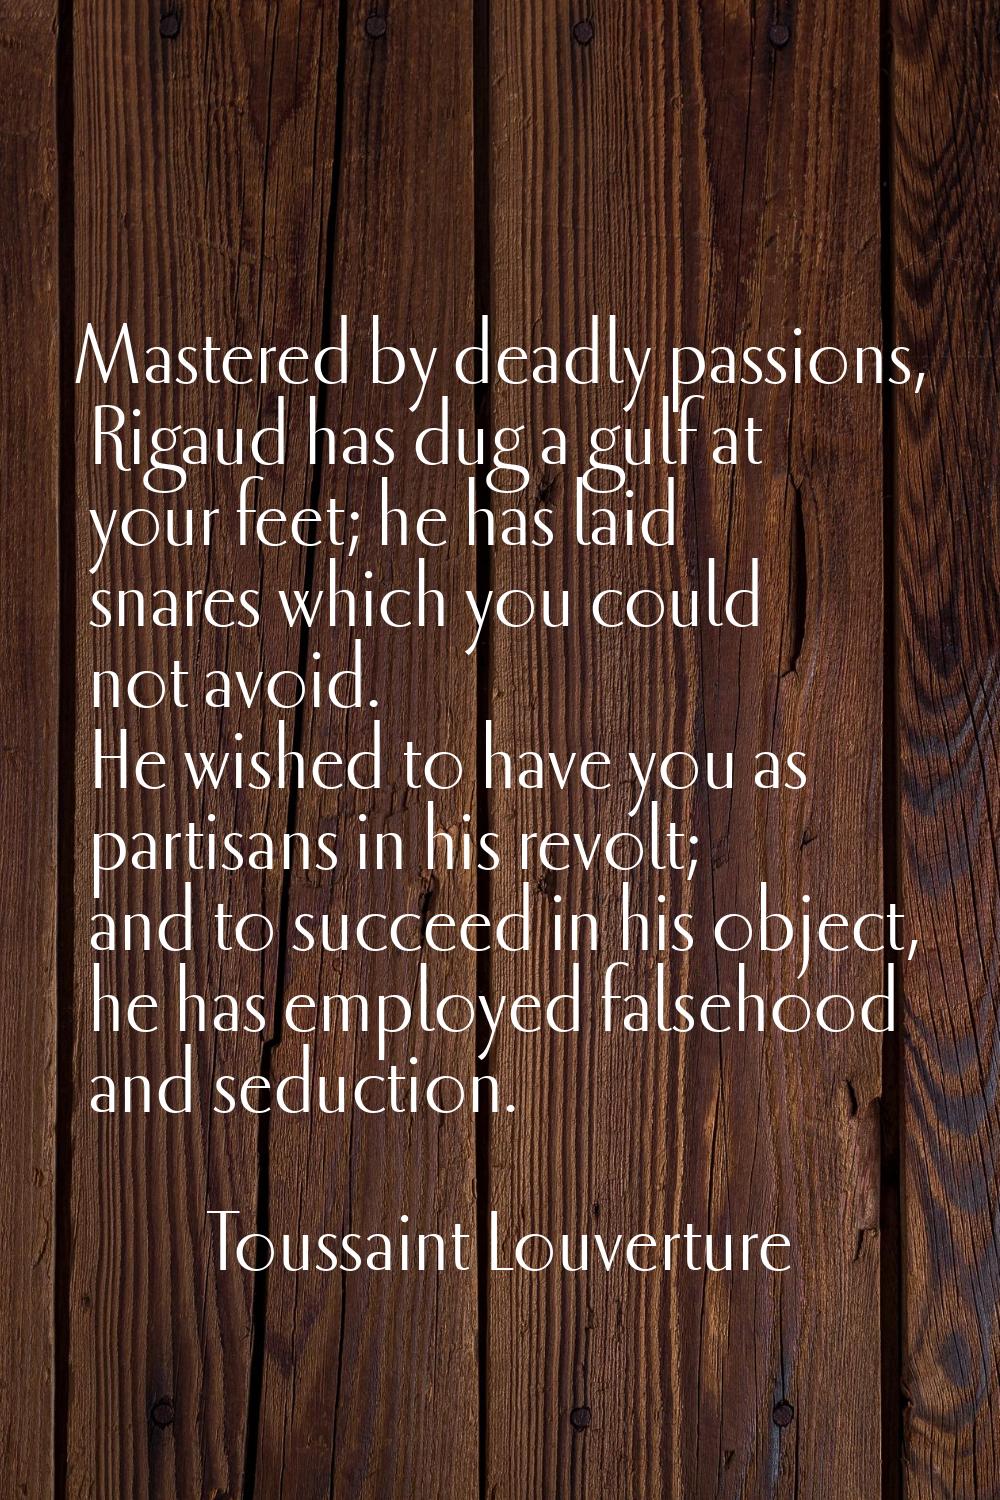 Mastered by deadly passions, Rigaud has dug a gulf at your feet; he has laid snares which you could